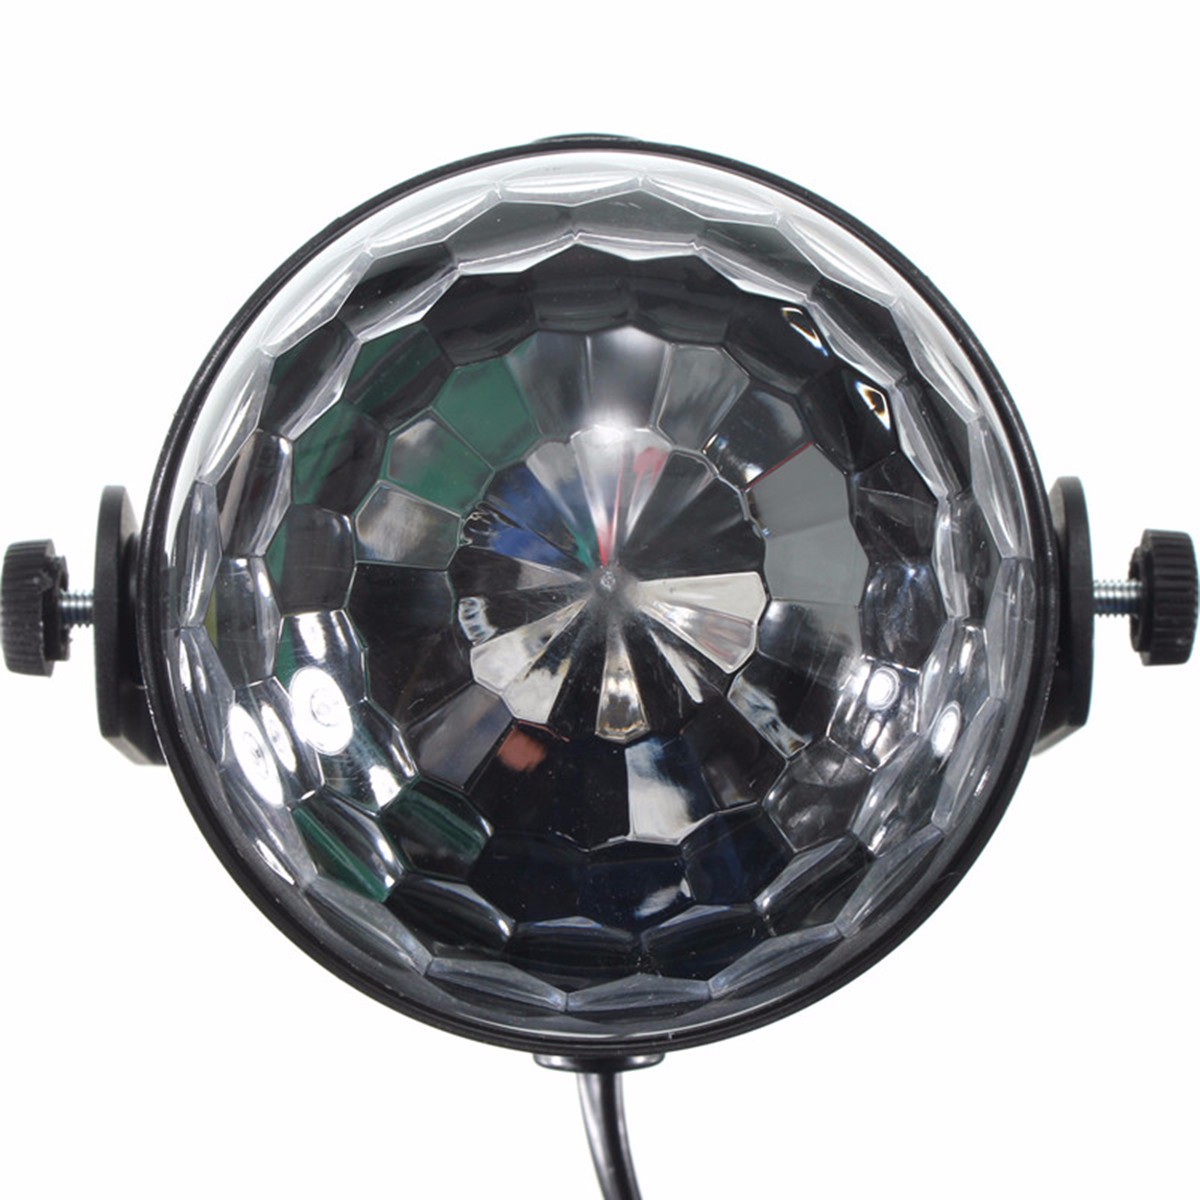 Find Kingso AC110 240V 5W RGB 16 Color Crystal Ball LED Stage Light Remote Control Lamp for Bar KTV Party Disco for Sale on Gipsybee.com with cryptocurrencies